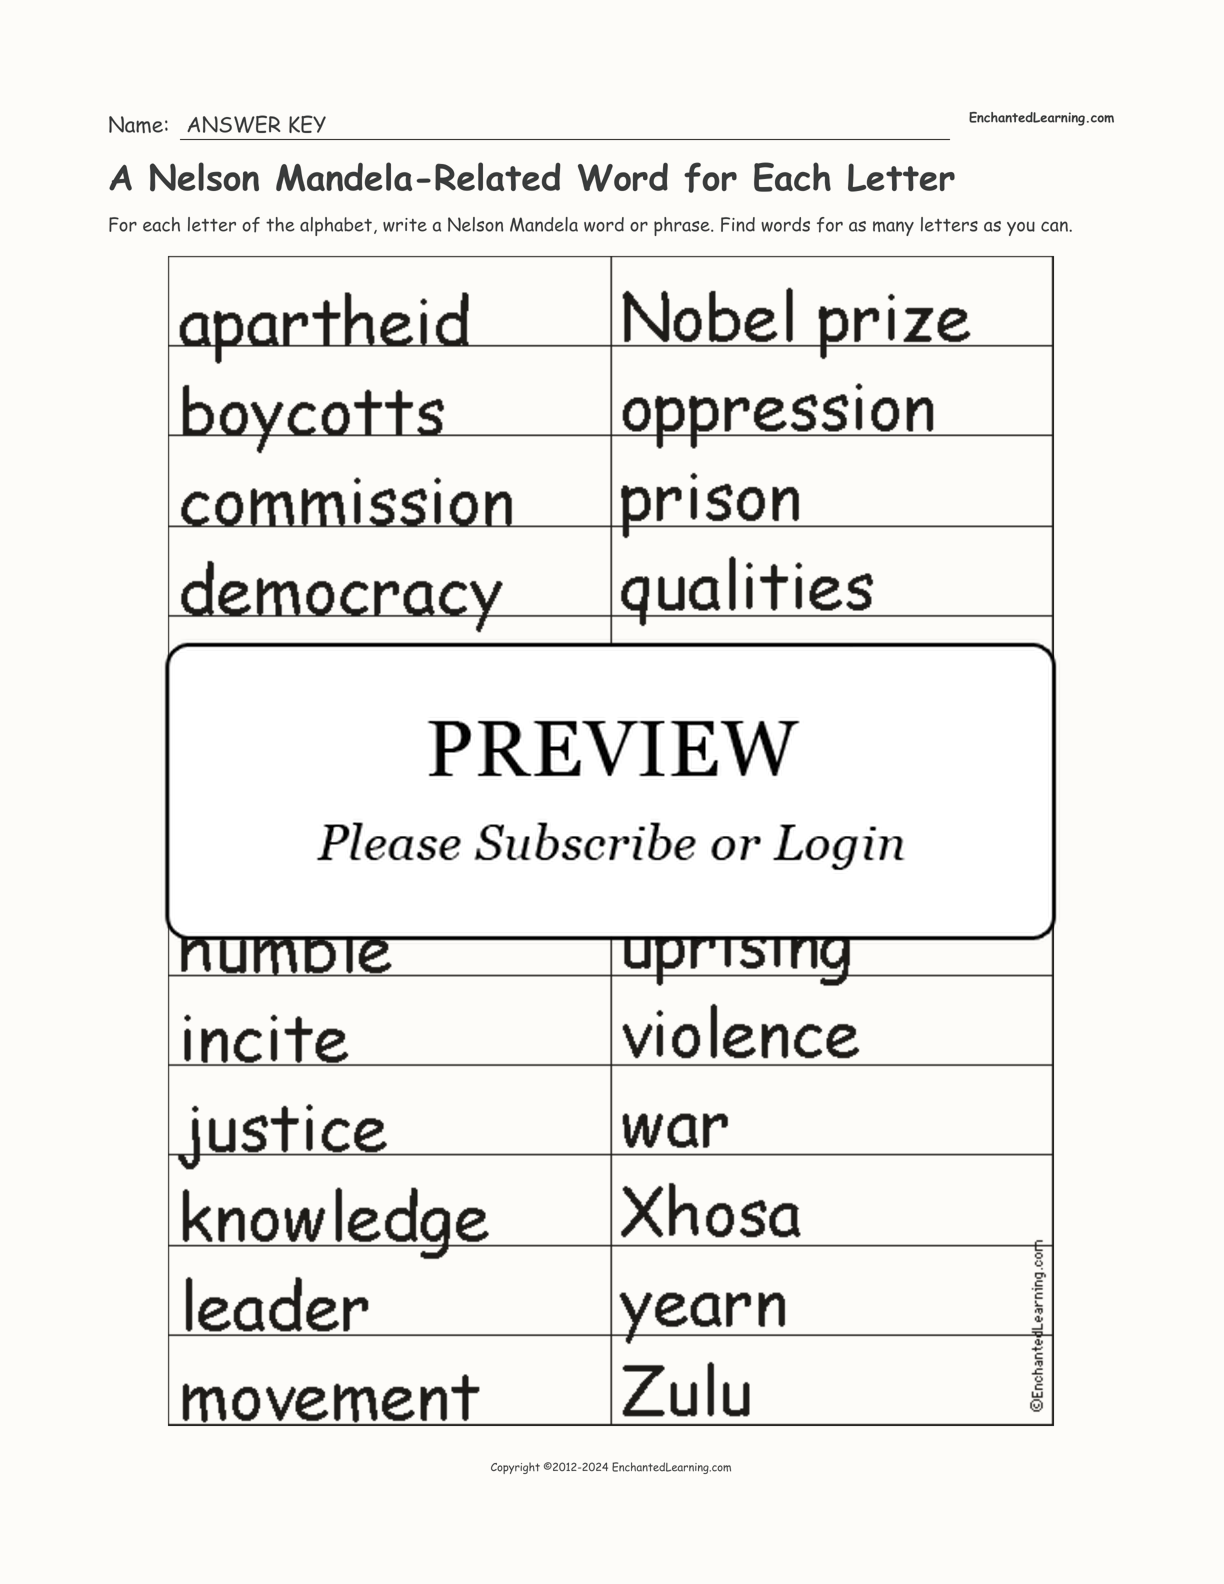 A Nelson Mandela-Related Word for Each Letter interactive worksheet page 2